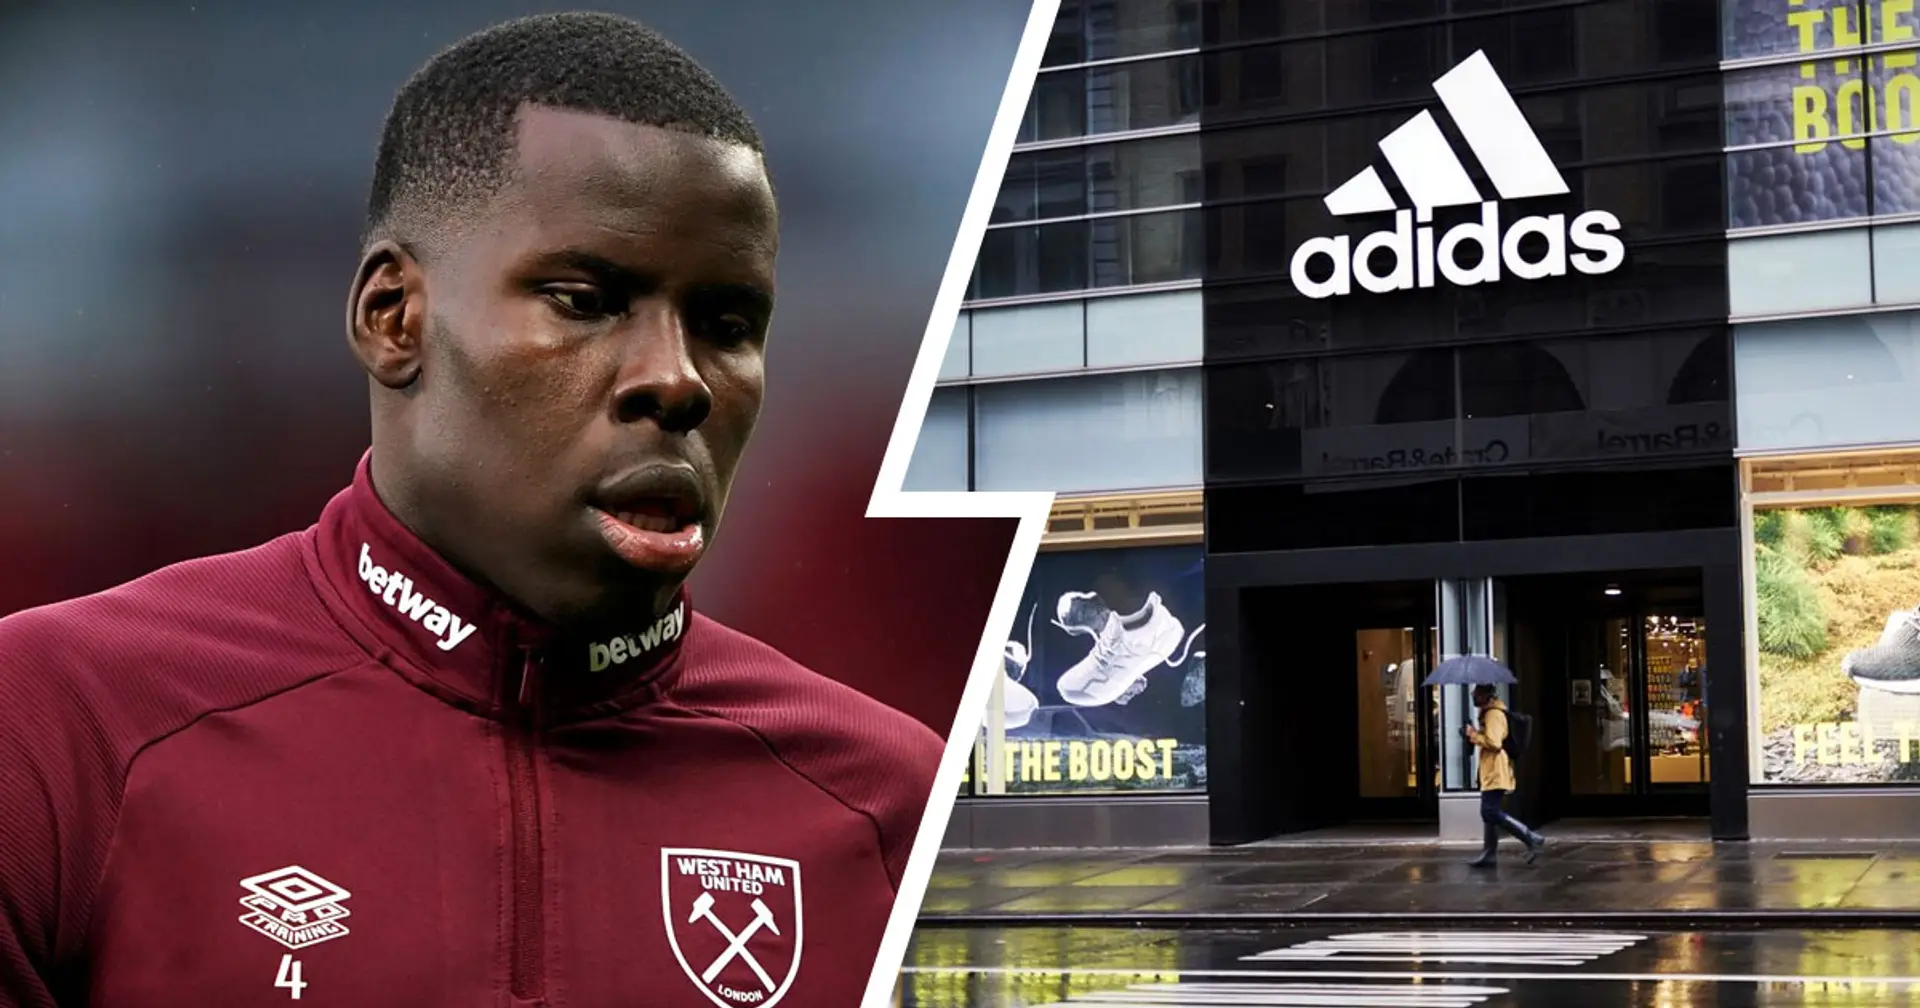 Adidas ends sponsorship deal with Zouma after controversy